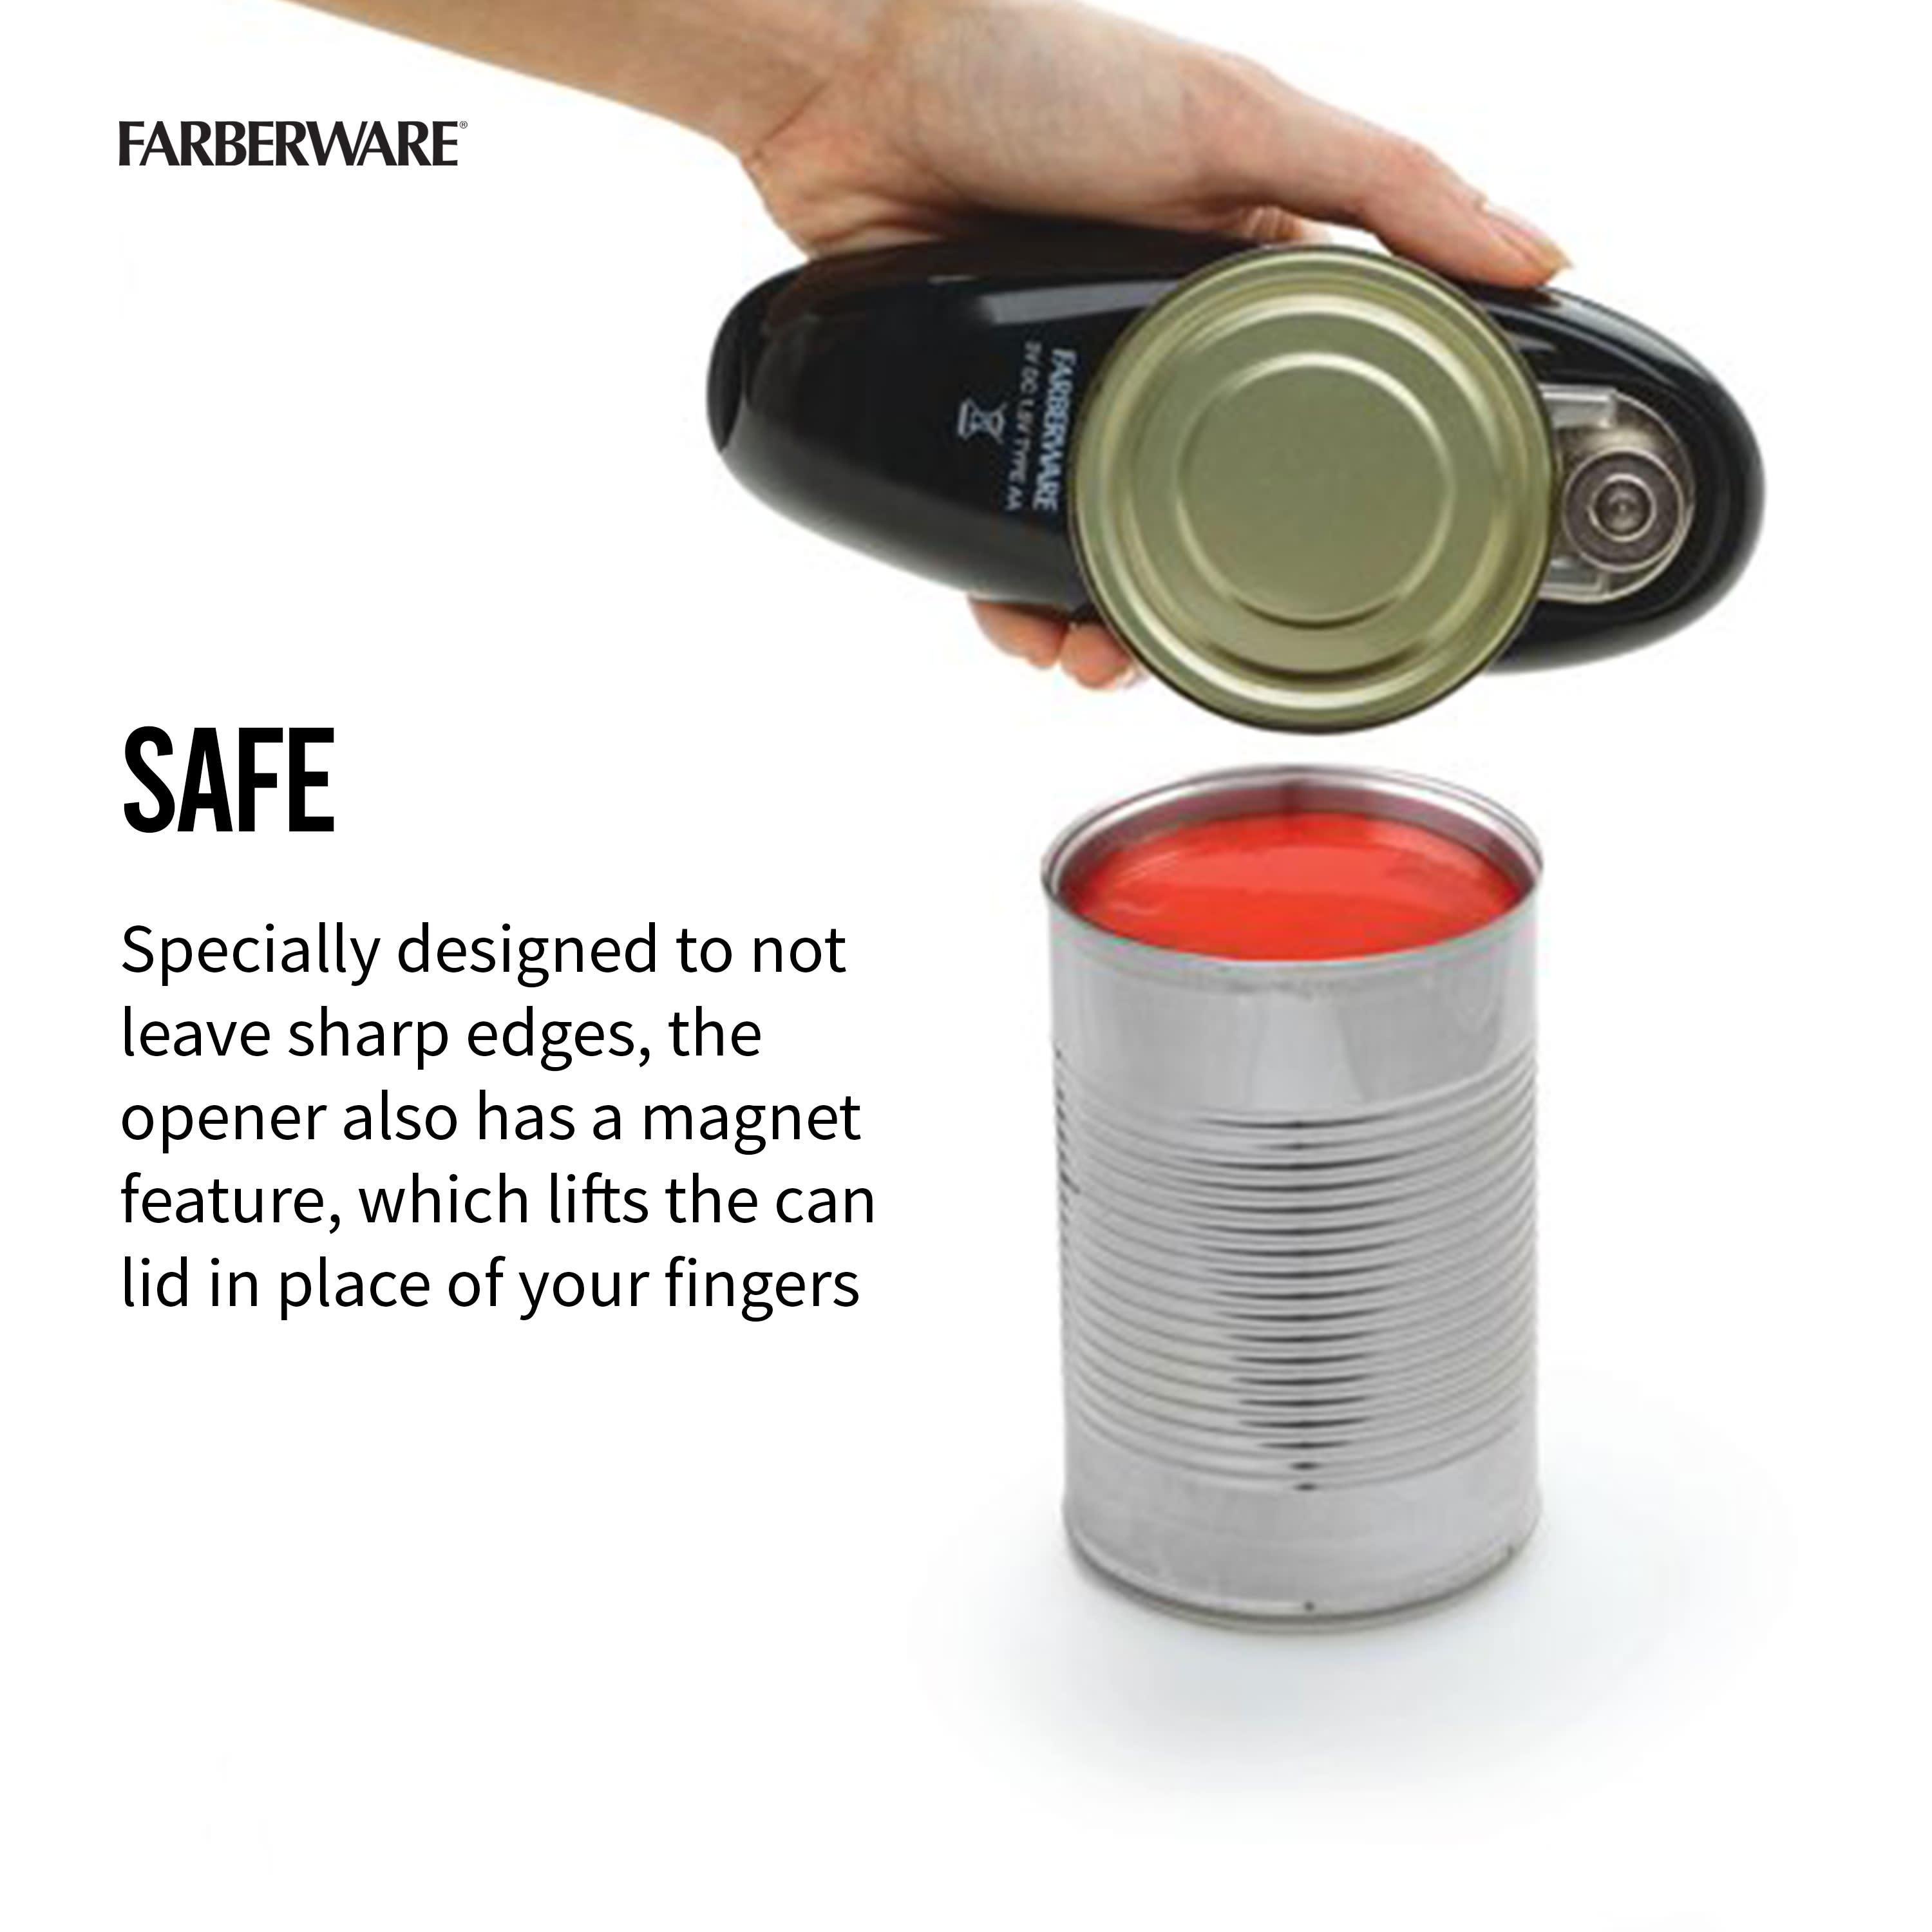 Farberware Hands-Free Battery-Operated Black Can Opener in Red - image 3 of 18